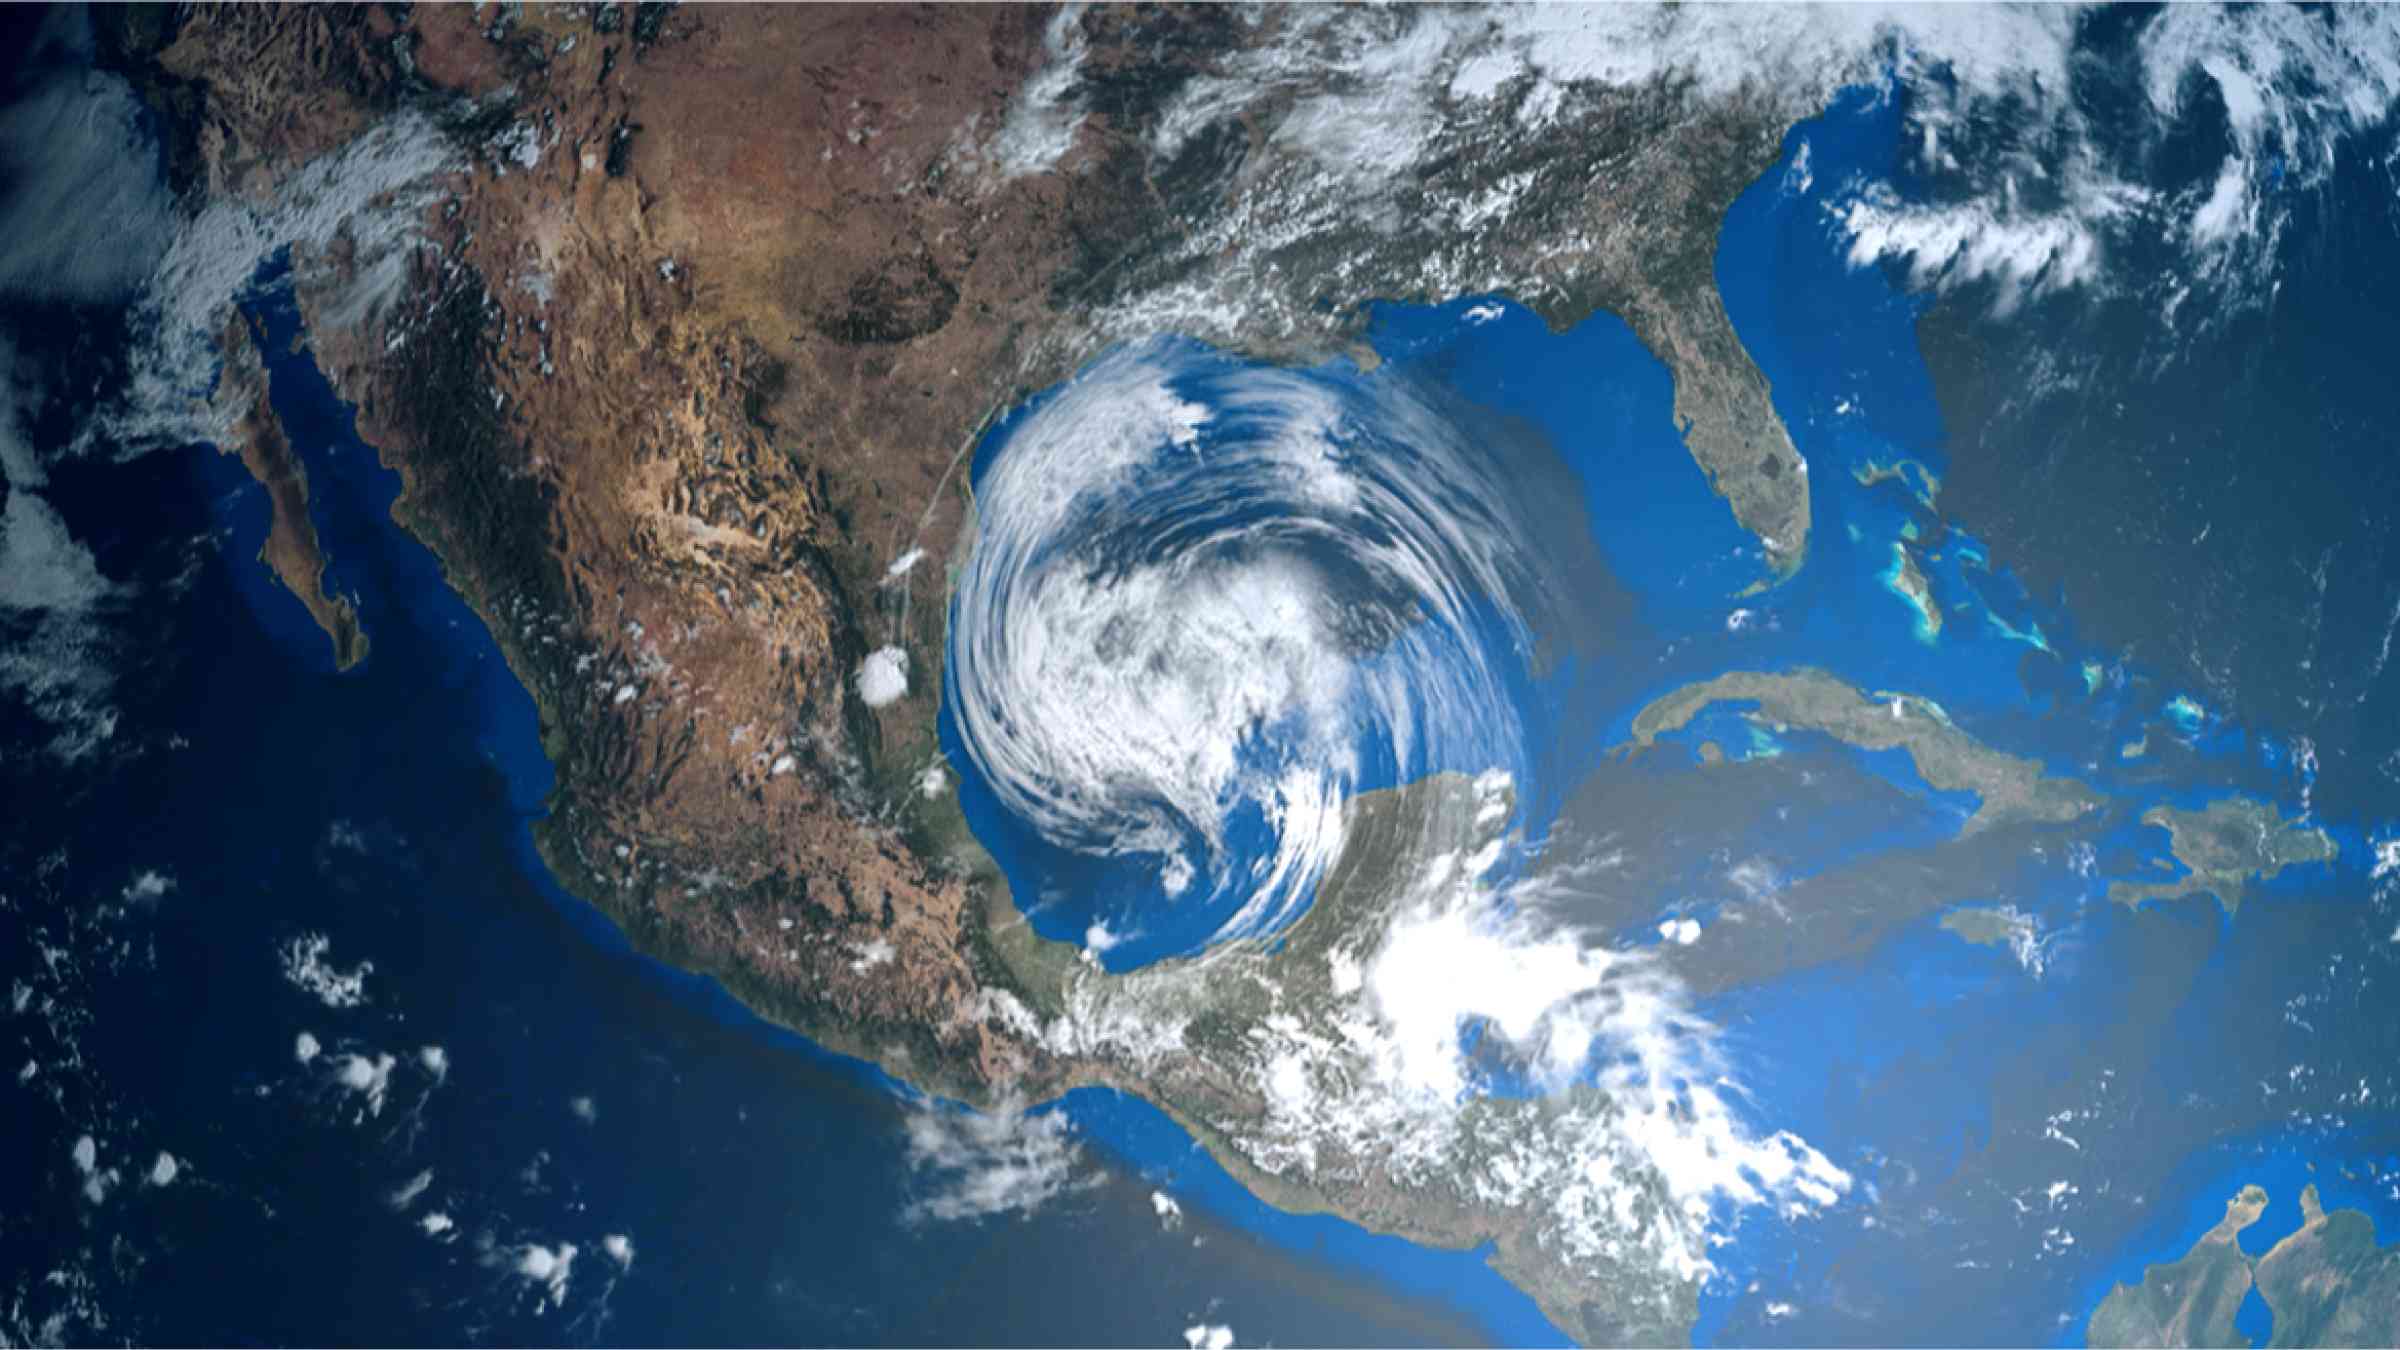 This is a shot from space illustrating a hurricane approaching Texas.